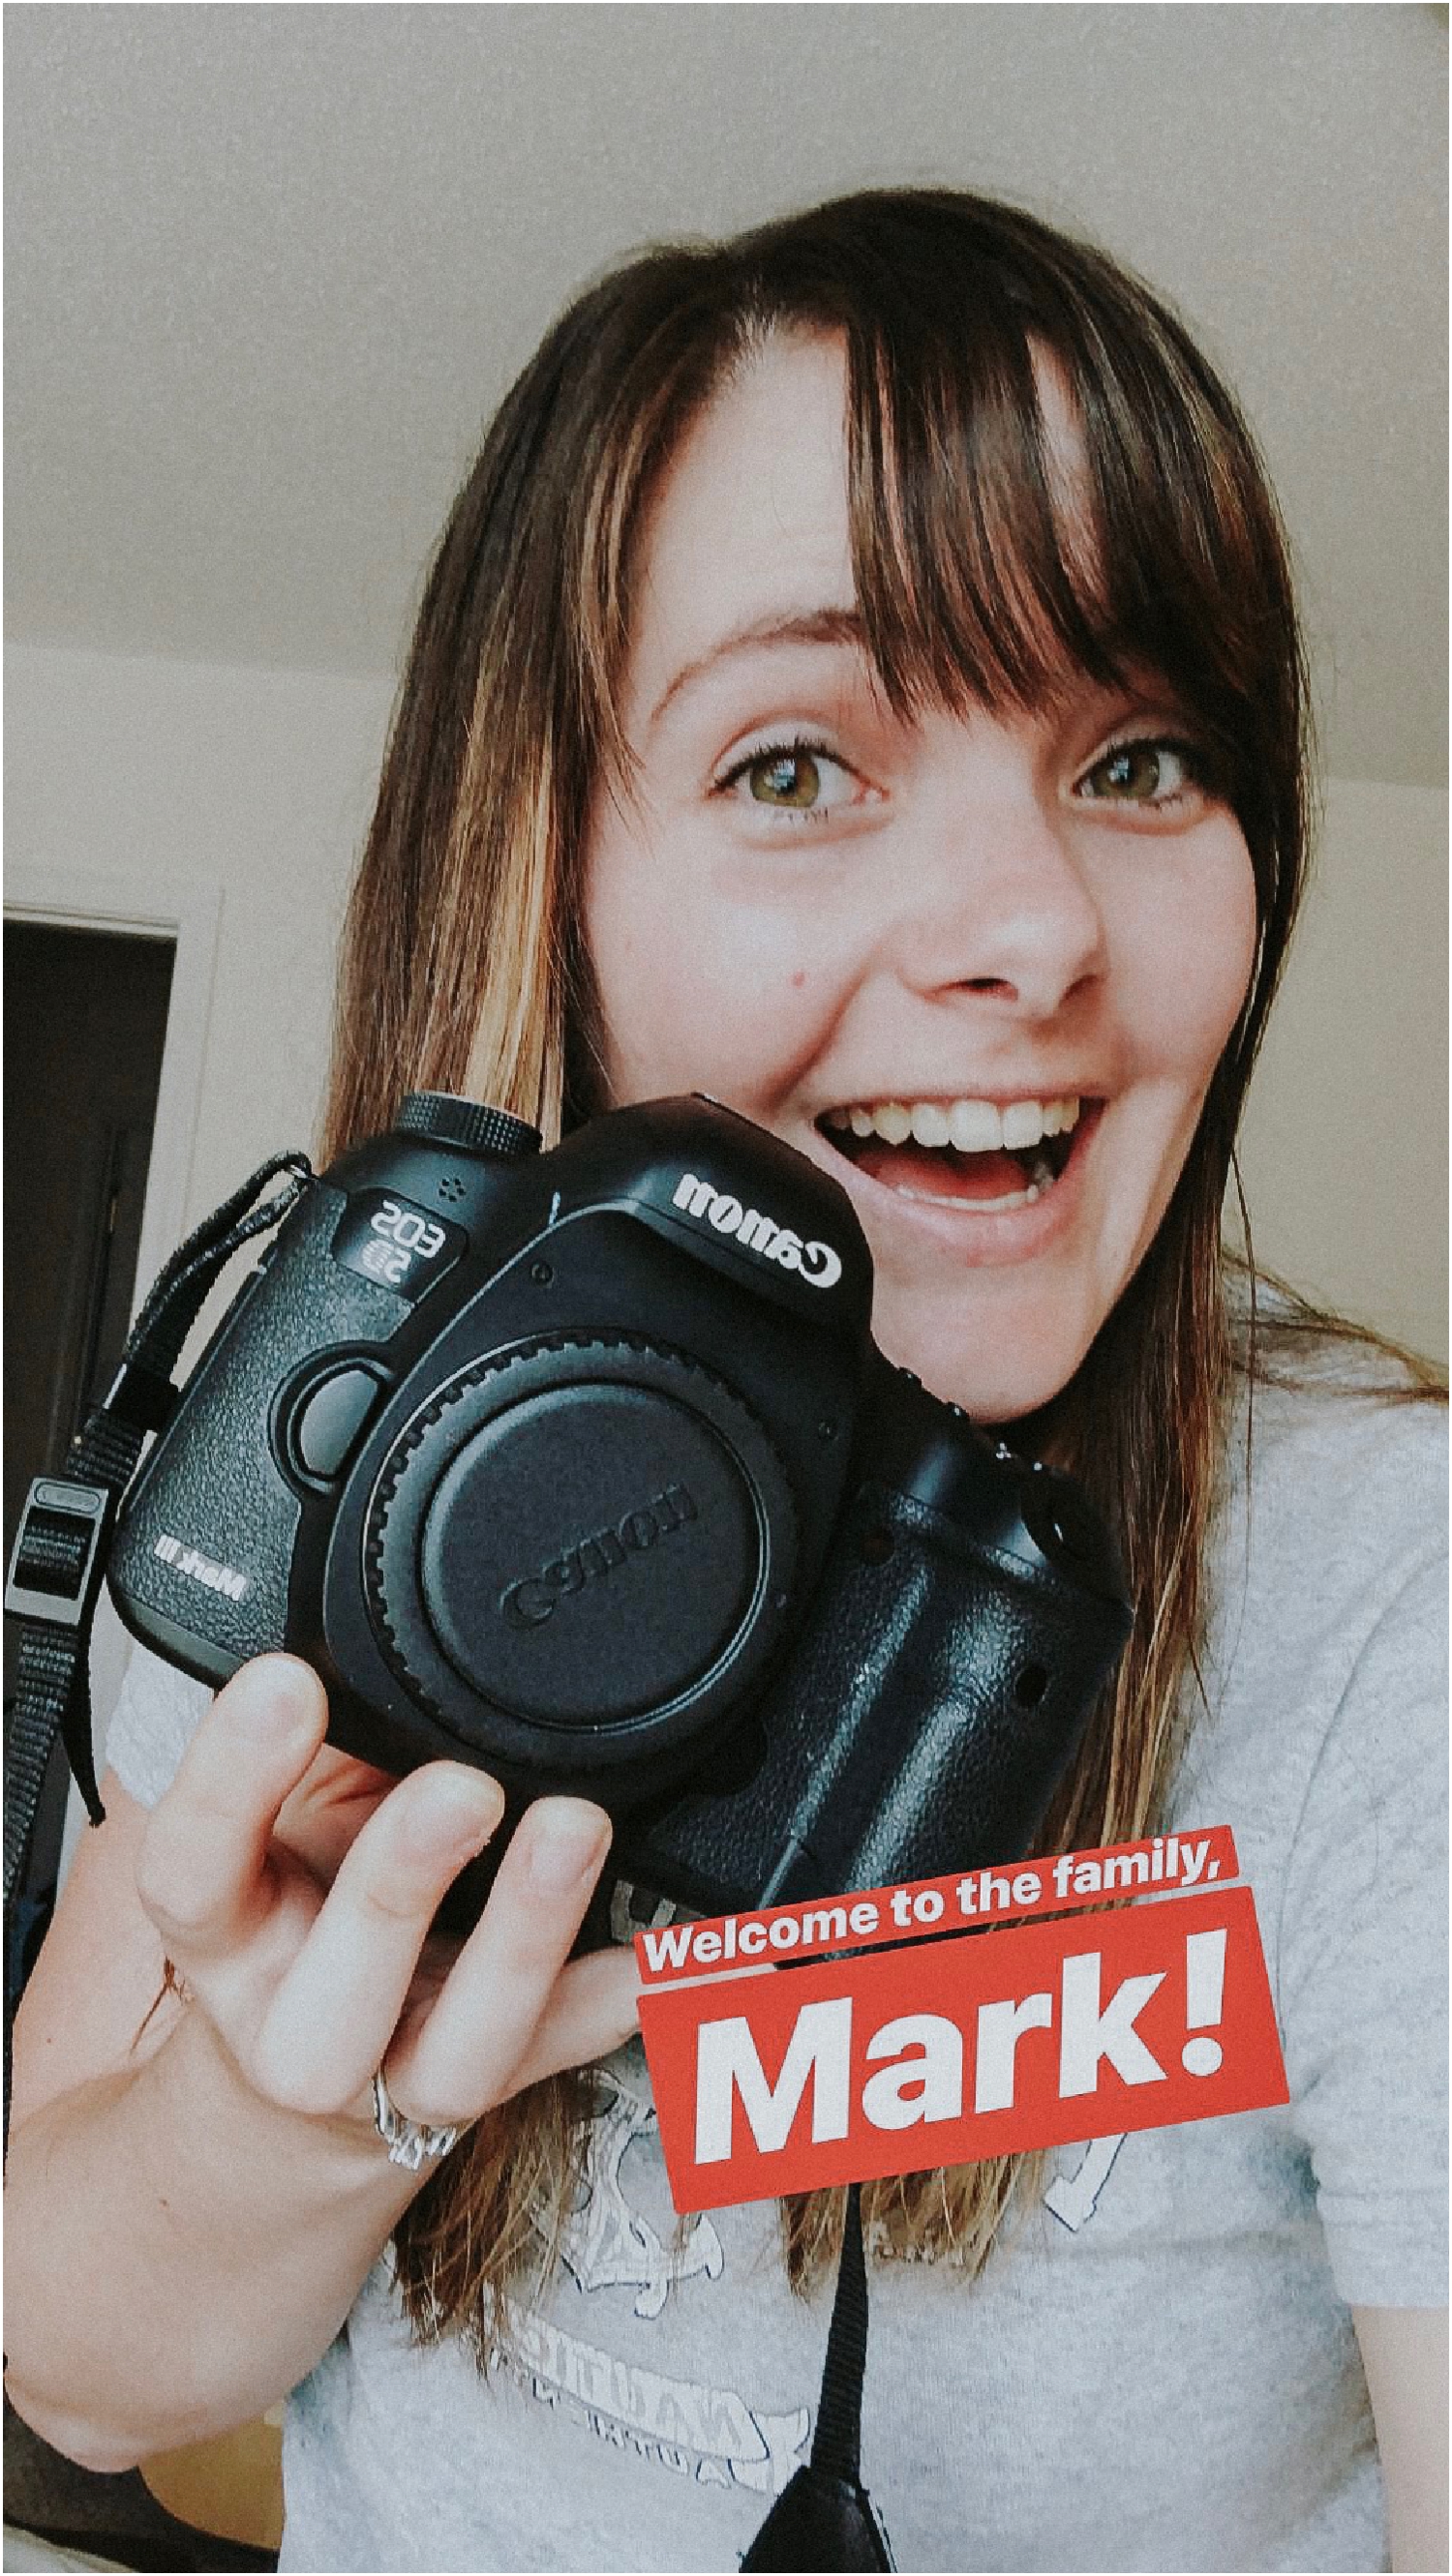 Welcomed a new family member- Mark, the Canon 5D Mark III!